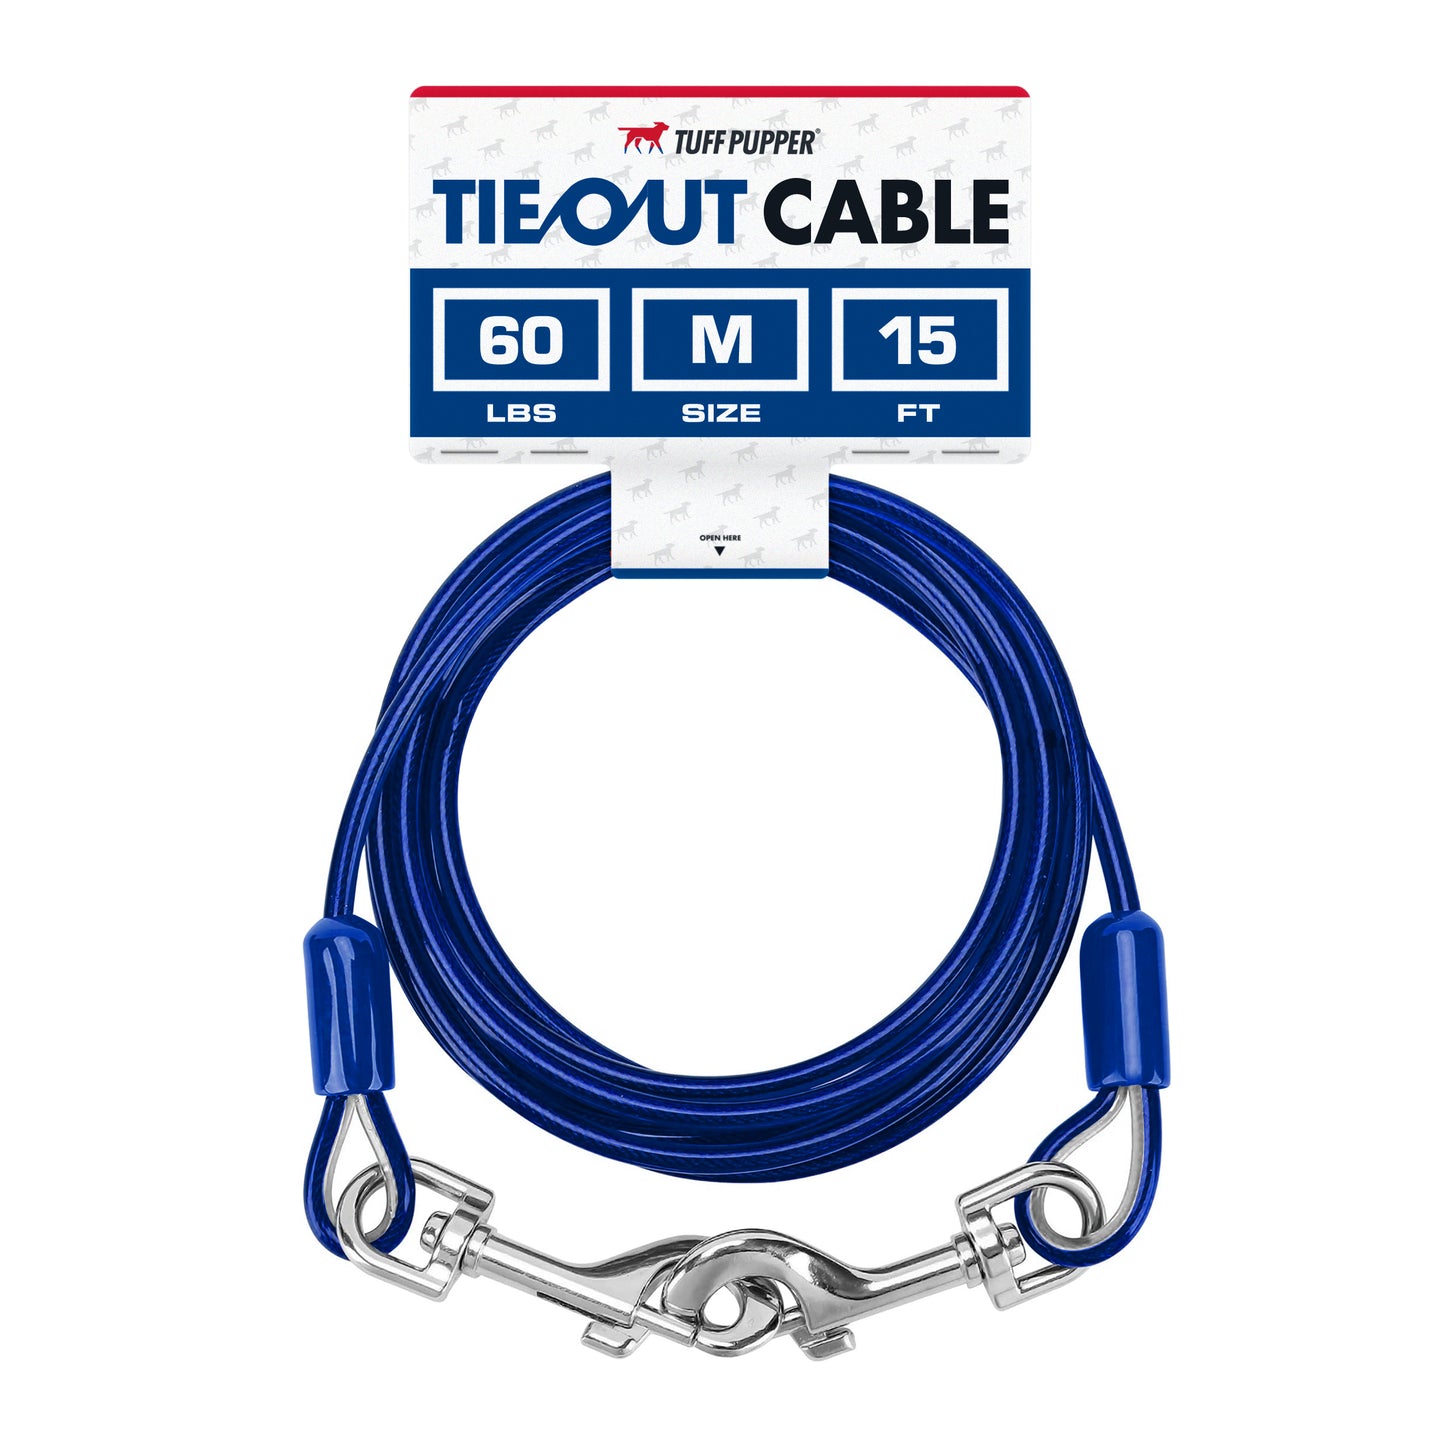 Tie-Out - Cables